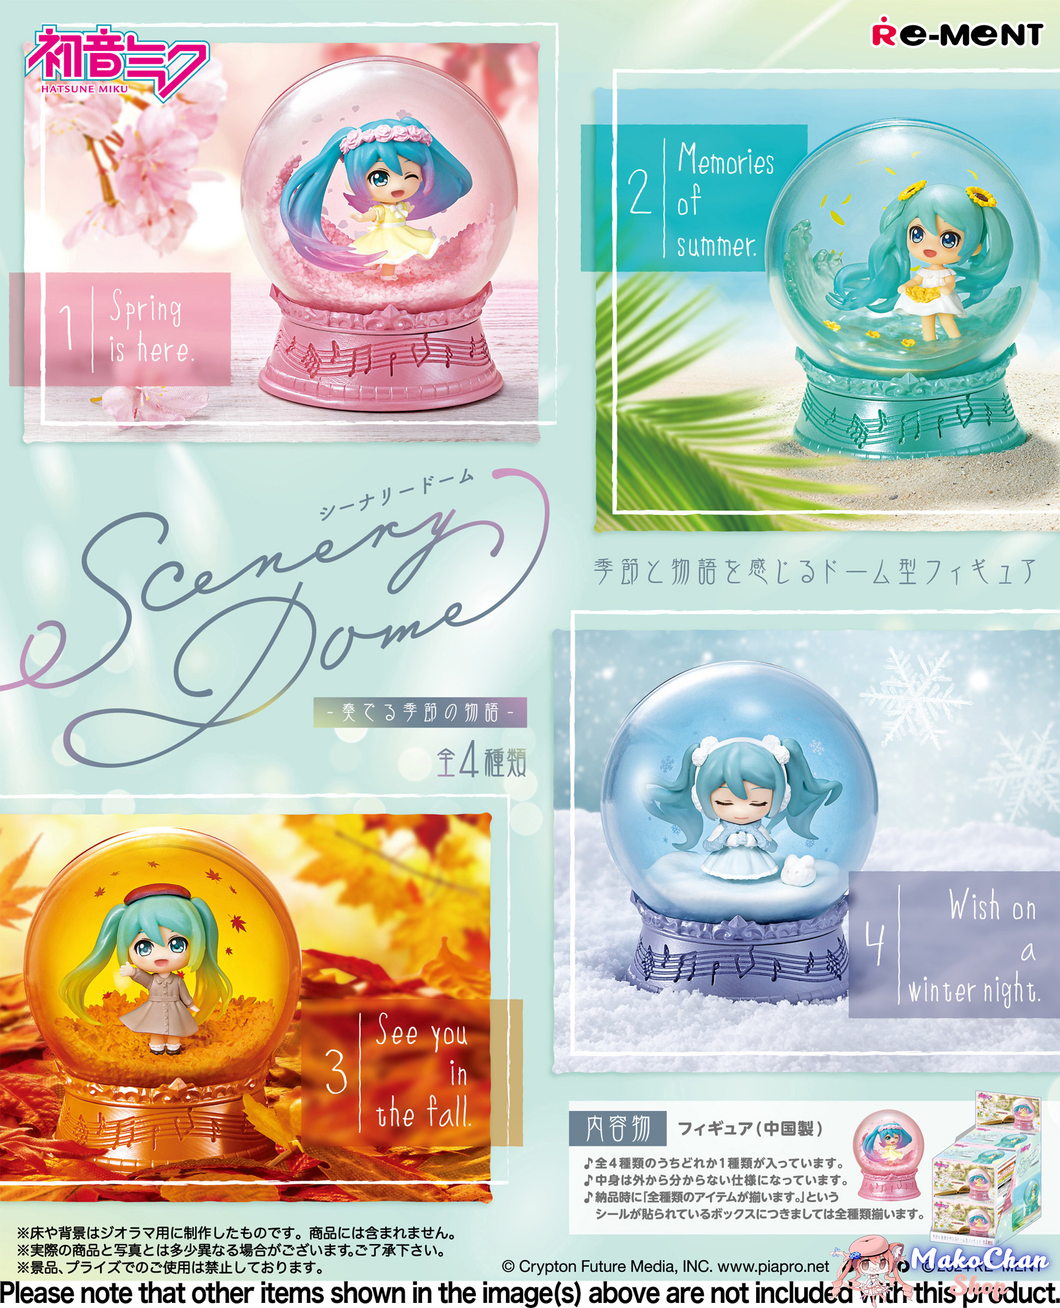 Re-ment Hatsune Miku: Scenery Dome - A Story of the Seasons (pre-order)